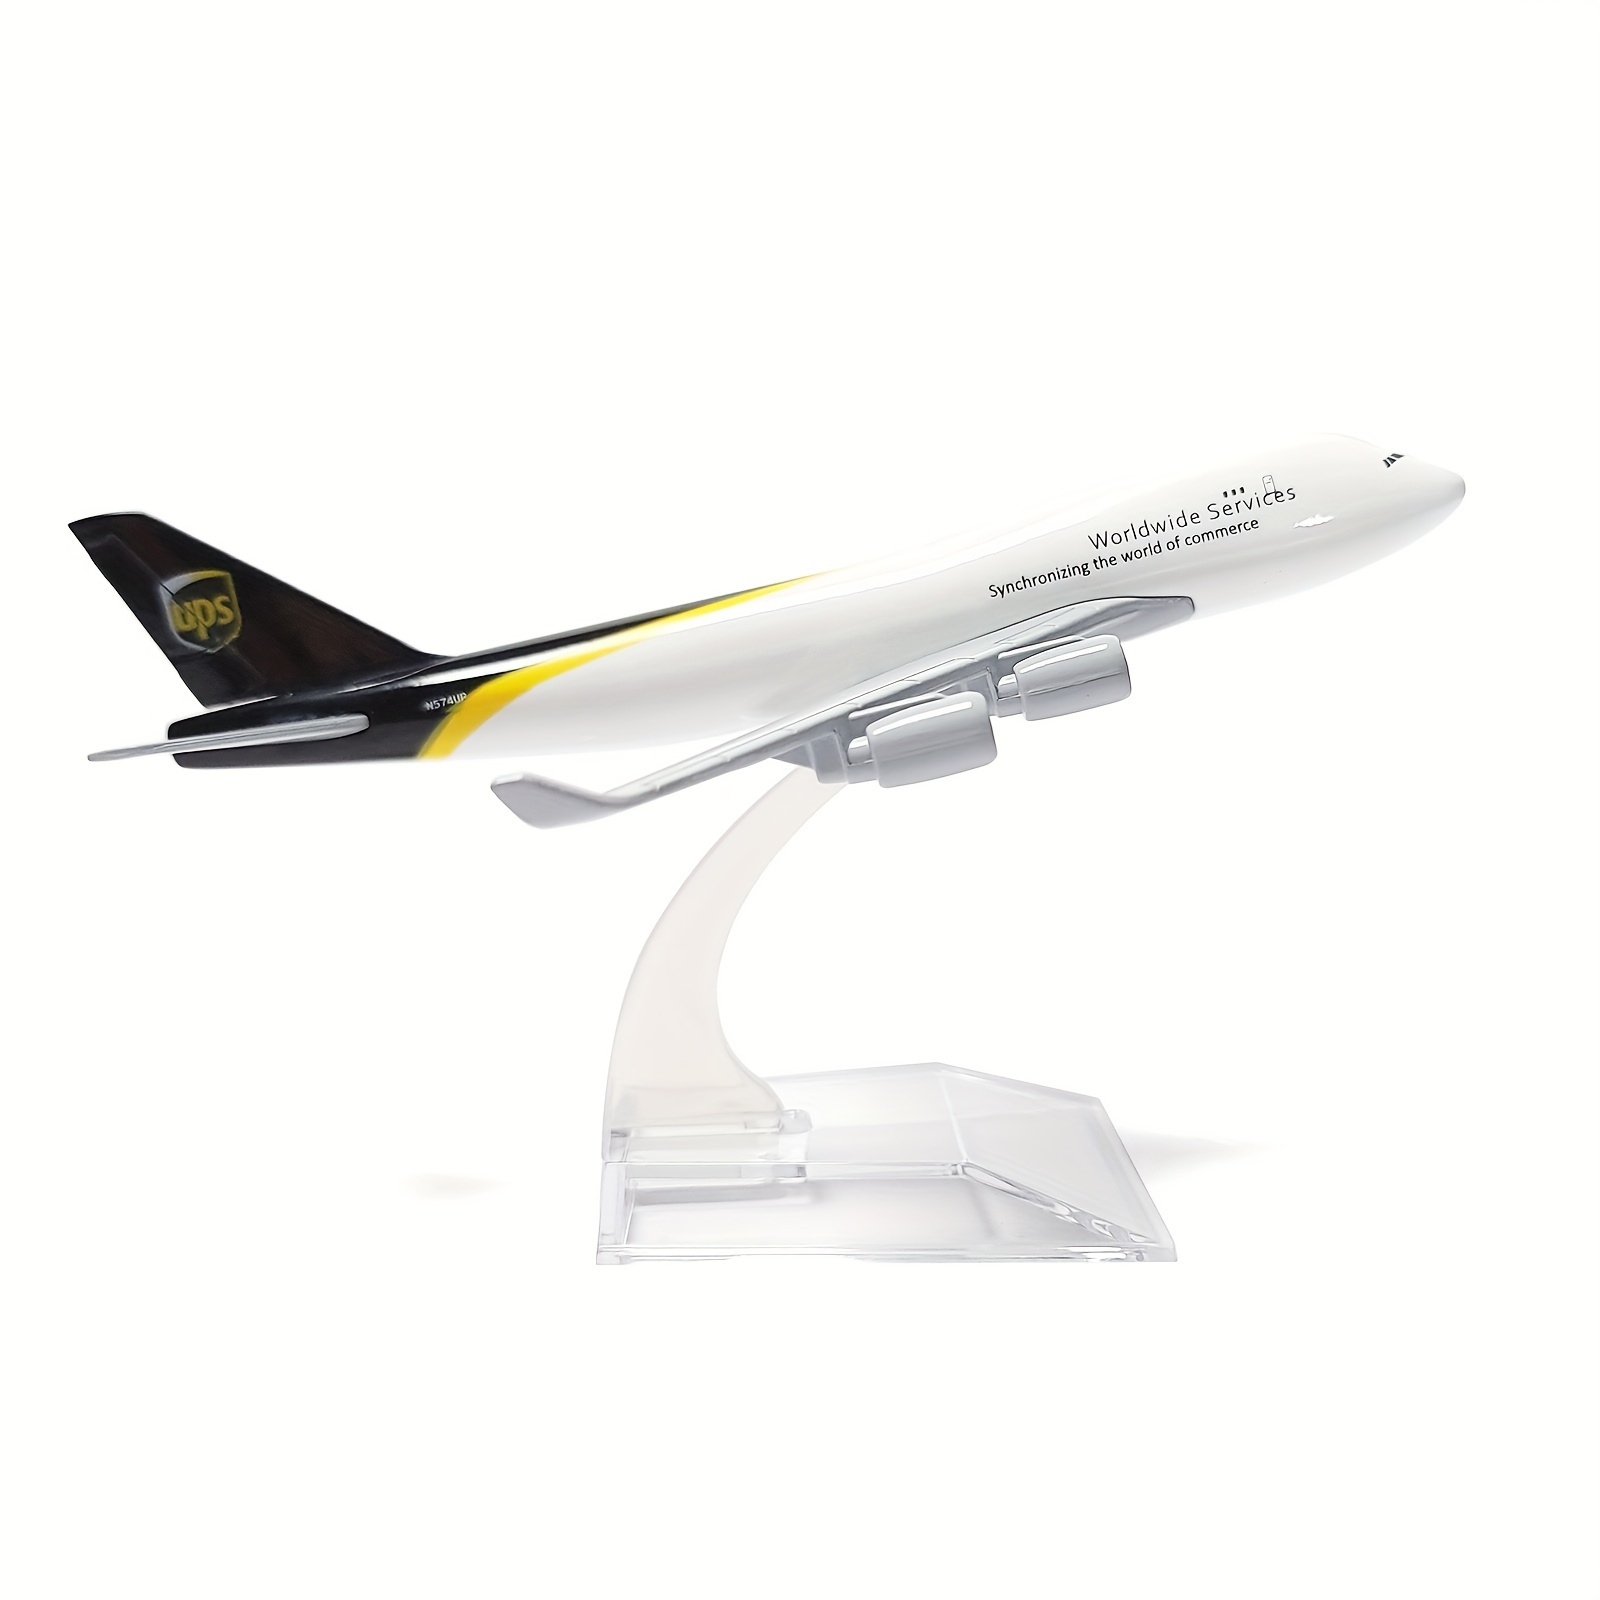 

Boeing 747 Airplane Model Ups Aviation 5.9 Inch Metal Diecast Jumbo Airliner Model For Collection And Gift